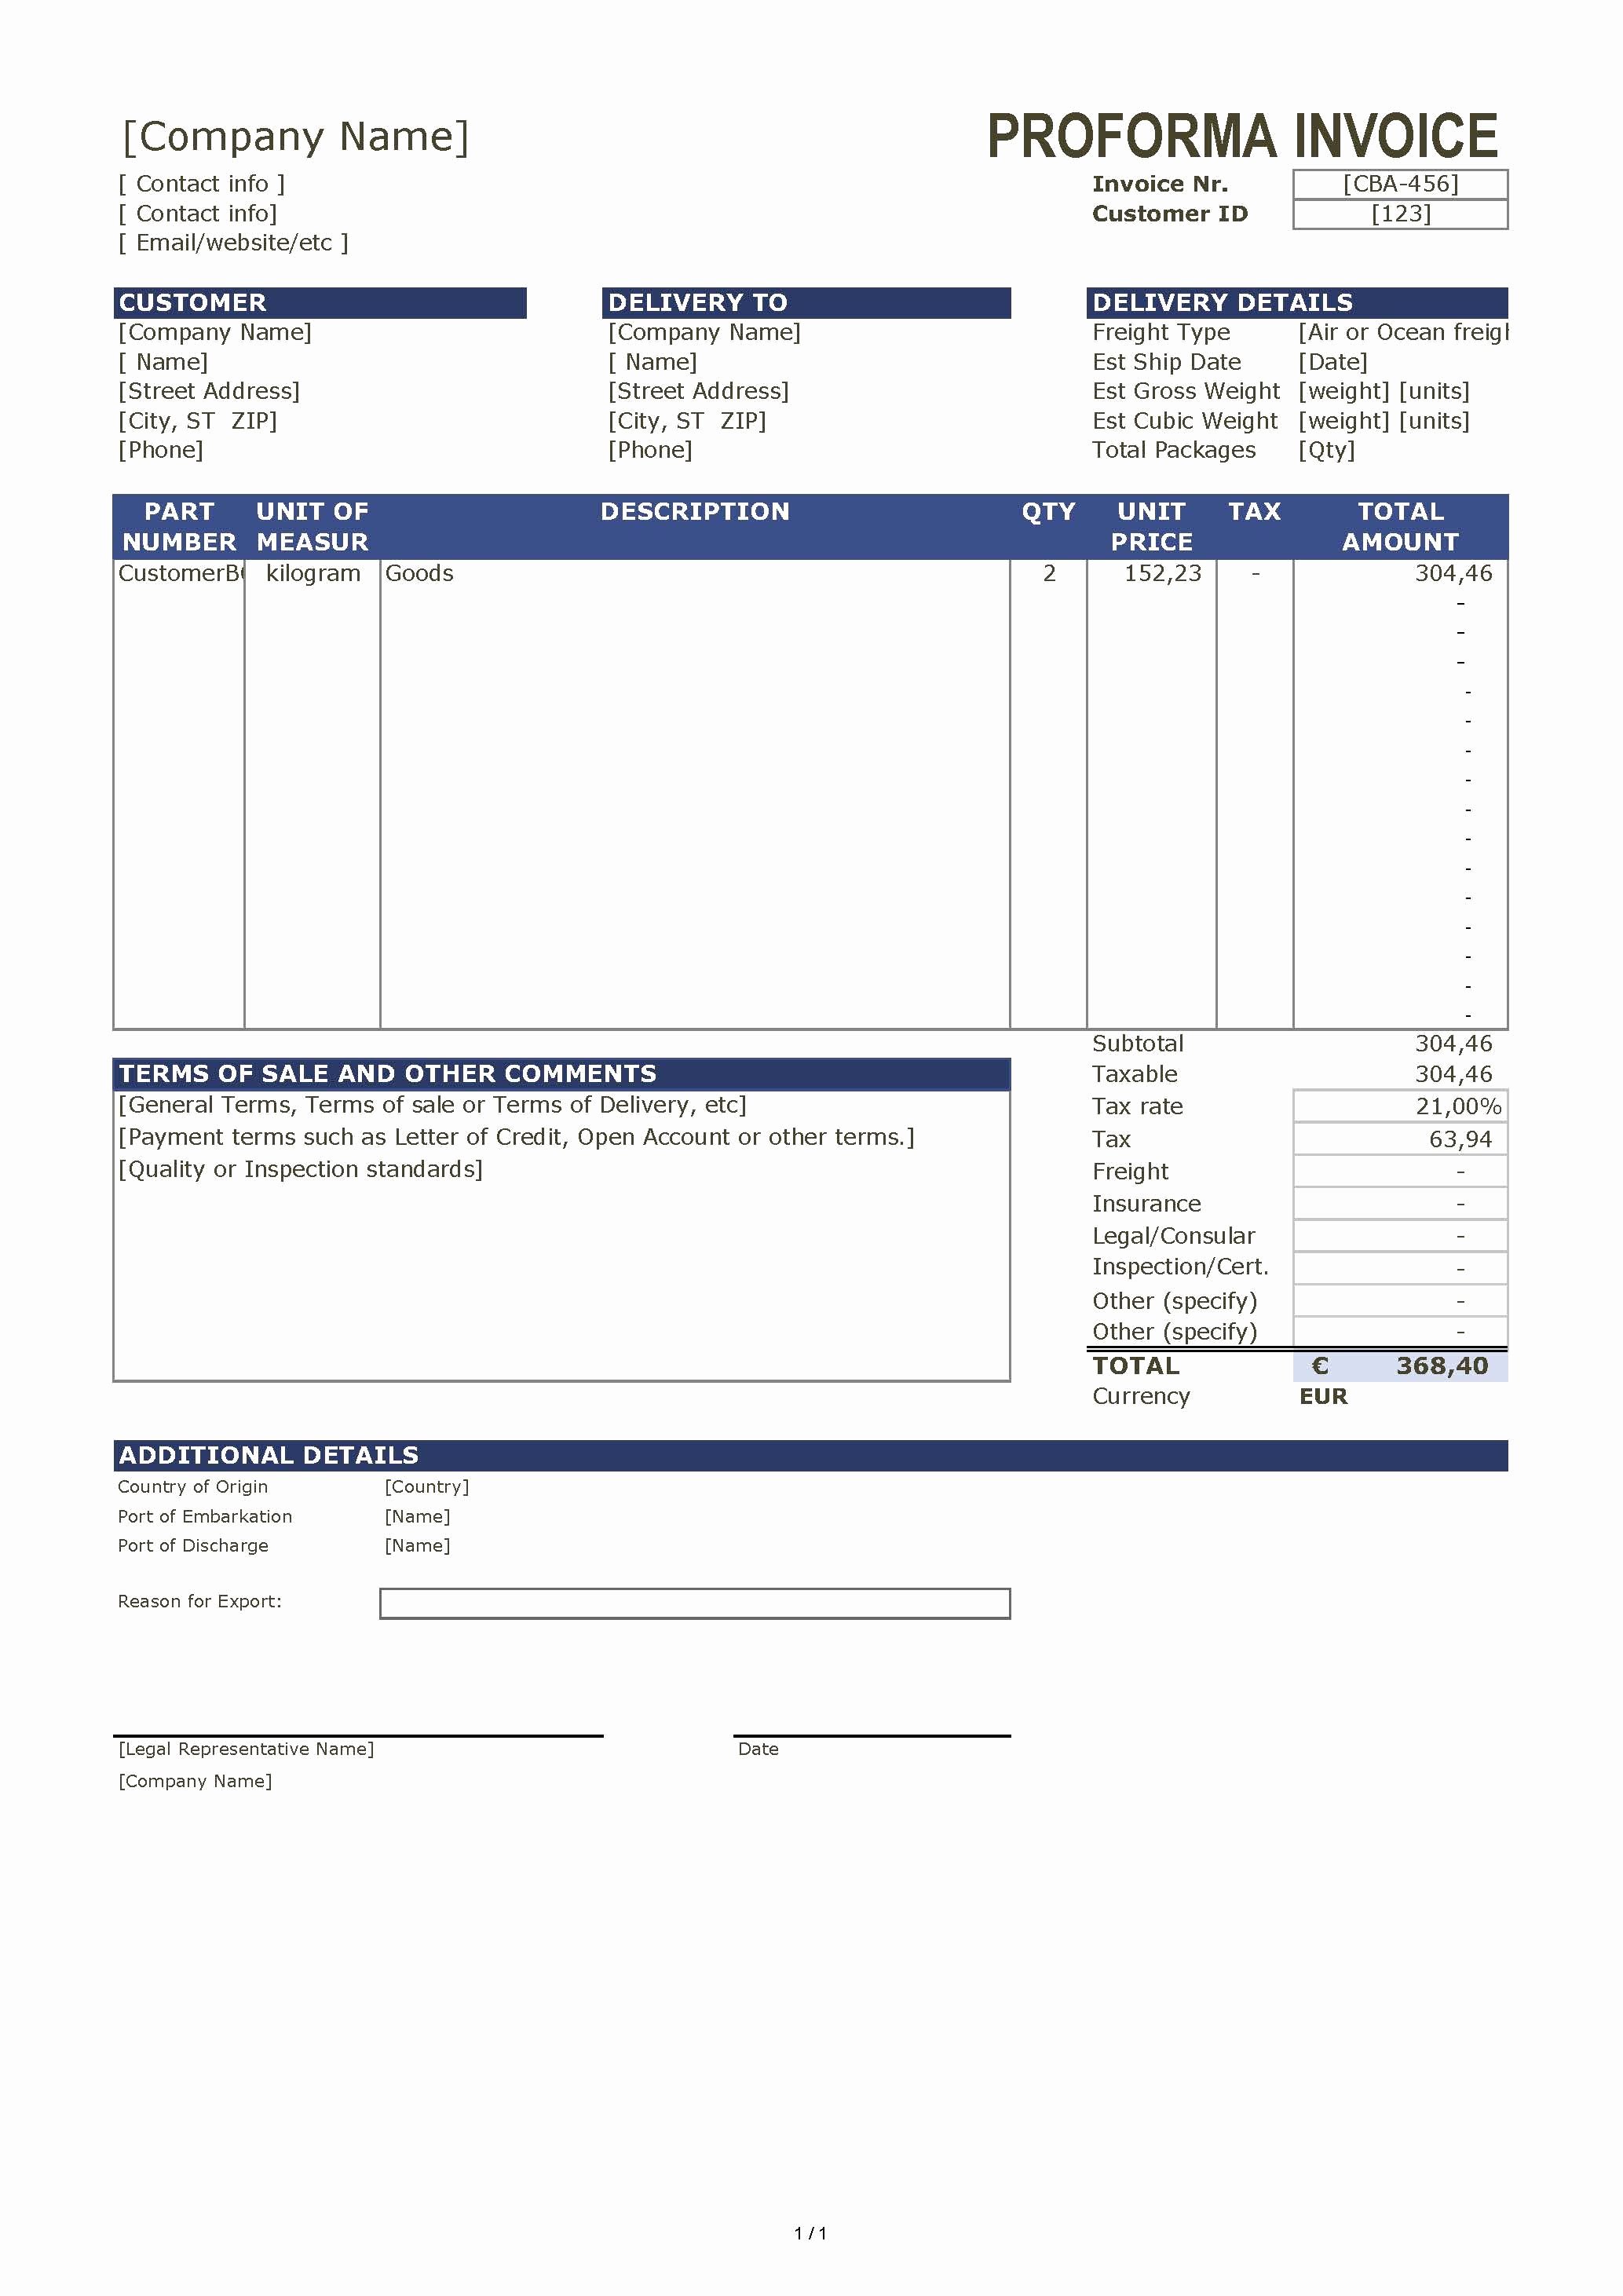 Free Proforma Invoice Template Awesome Free Proforma Invoice Template